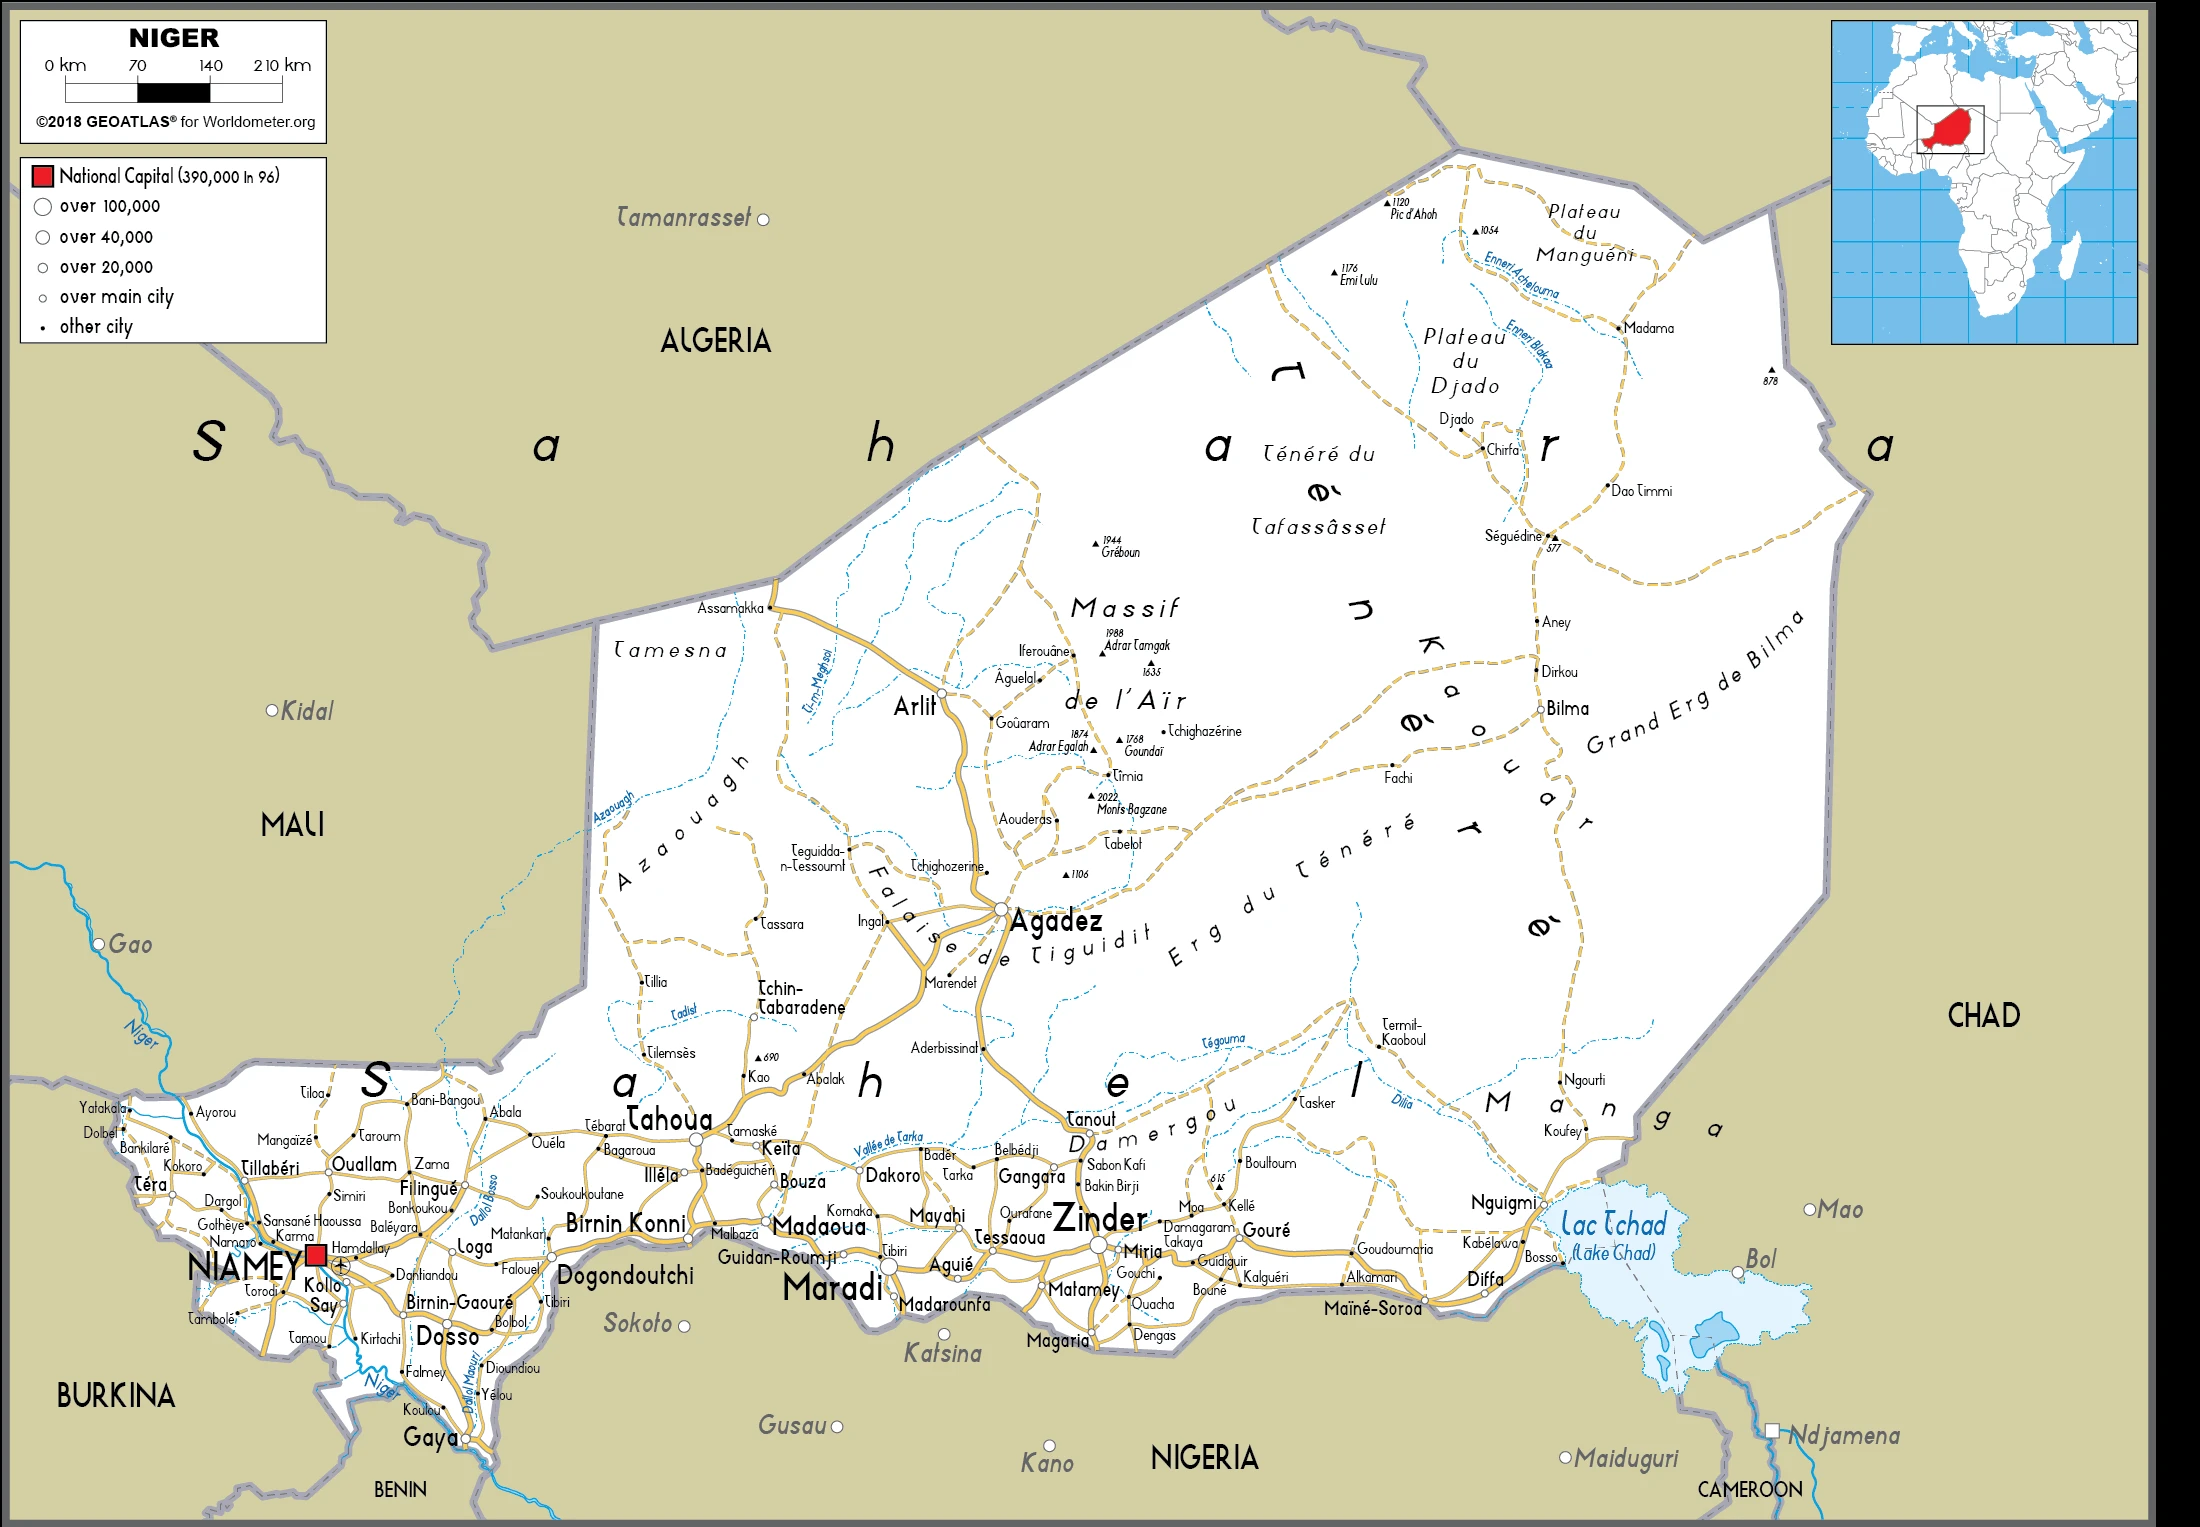 The route plan of the Nigerien roadways.